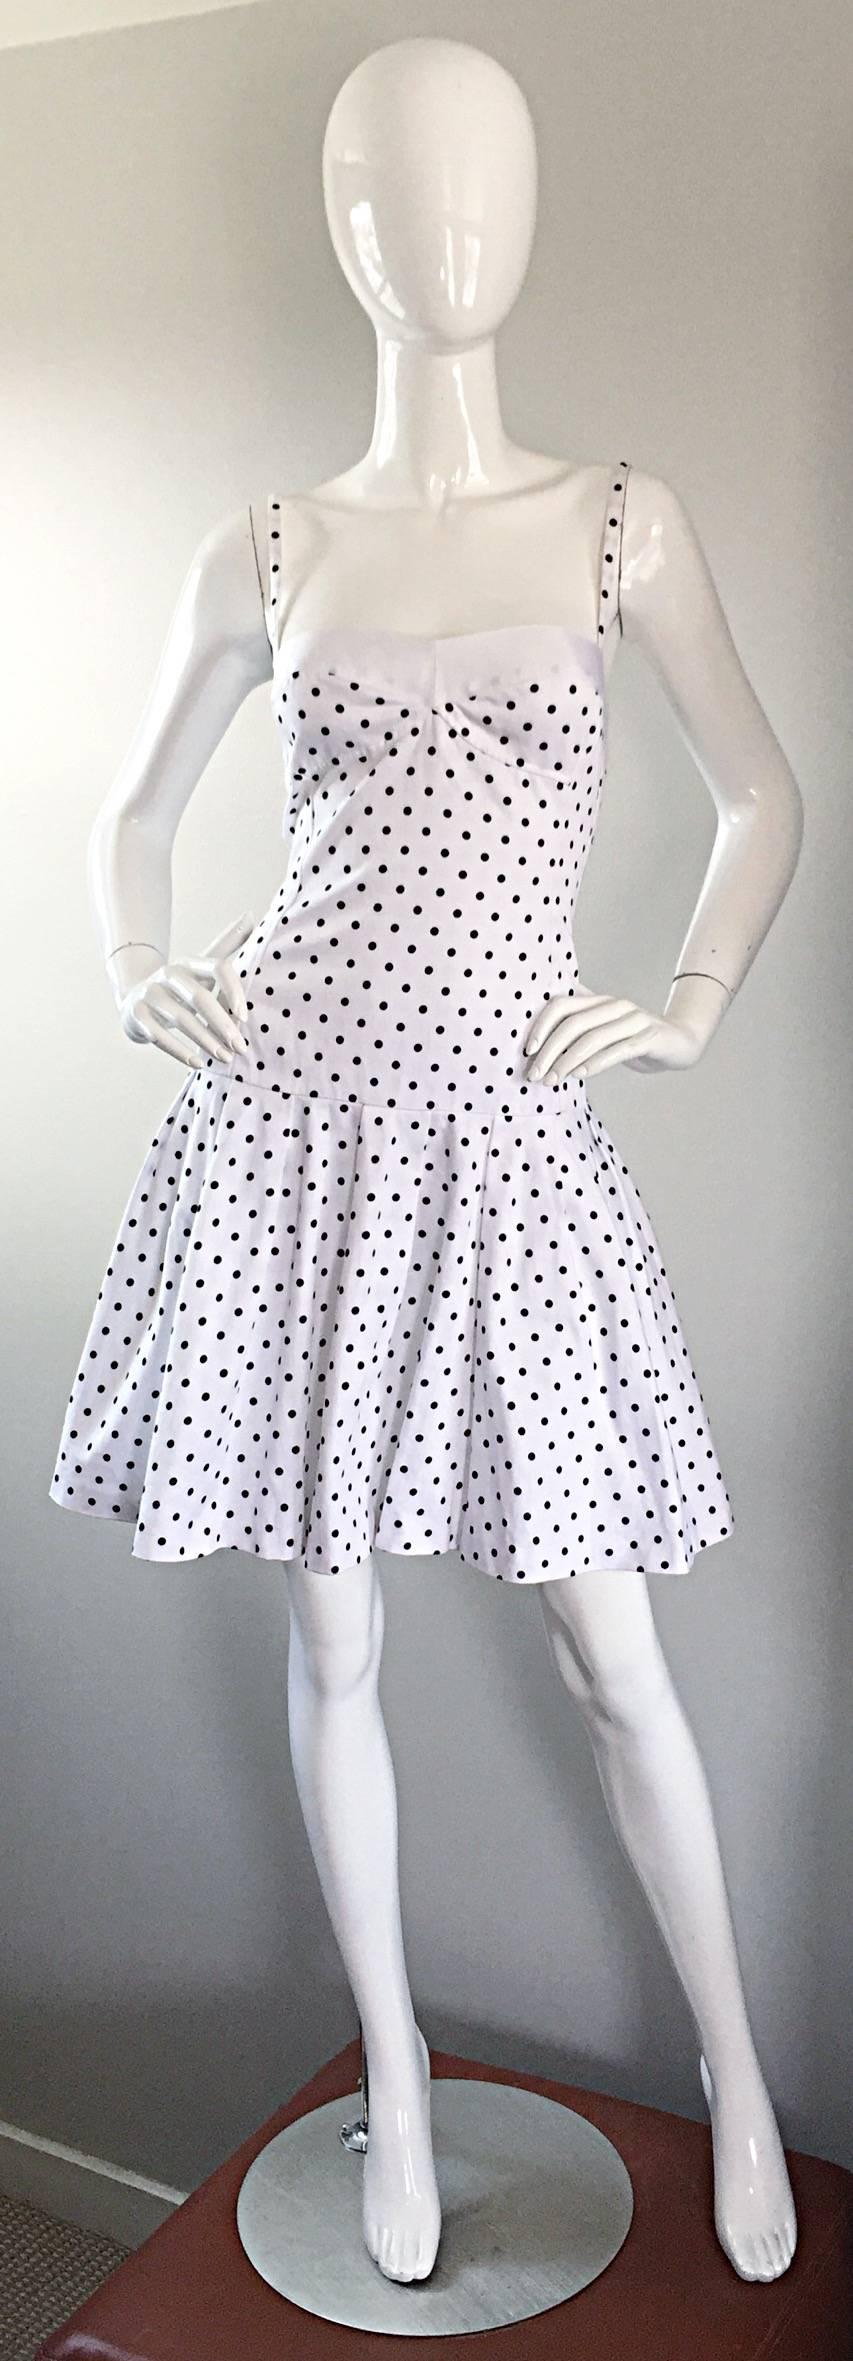 Incredible vintage 80s ENRICO COVERI white and black polka dot printed dress! Features all over polka dots, with white silk grosgrain ribbon detail at bust. Super flattering bodice, with an attached flared skirt! Hidden zipper up the back with